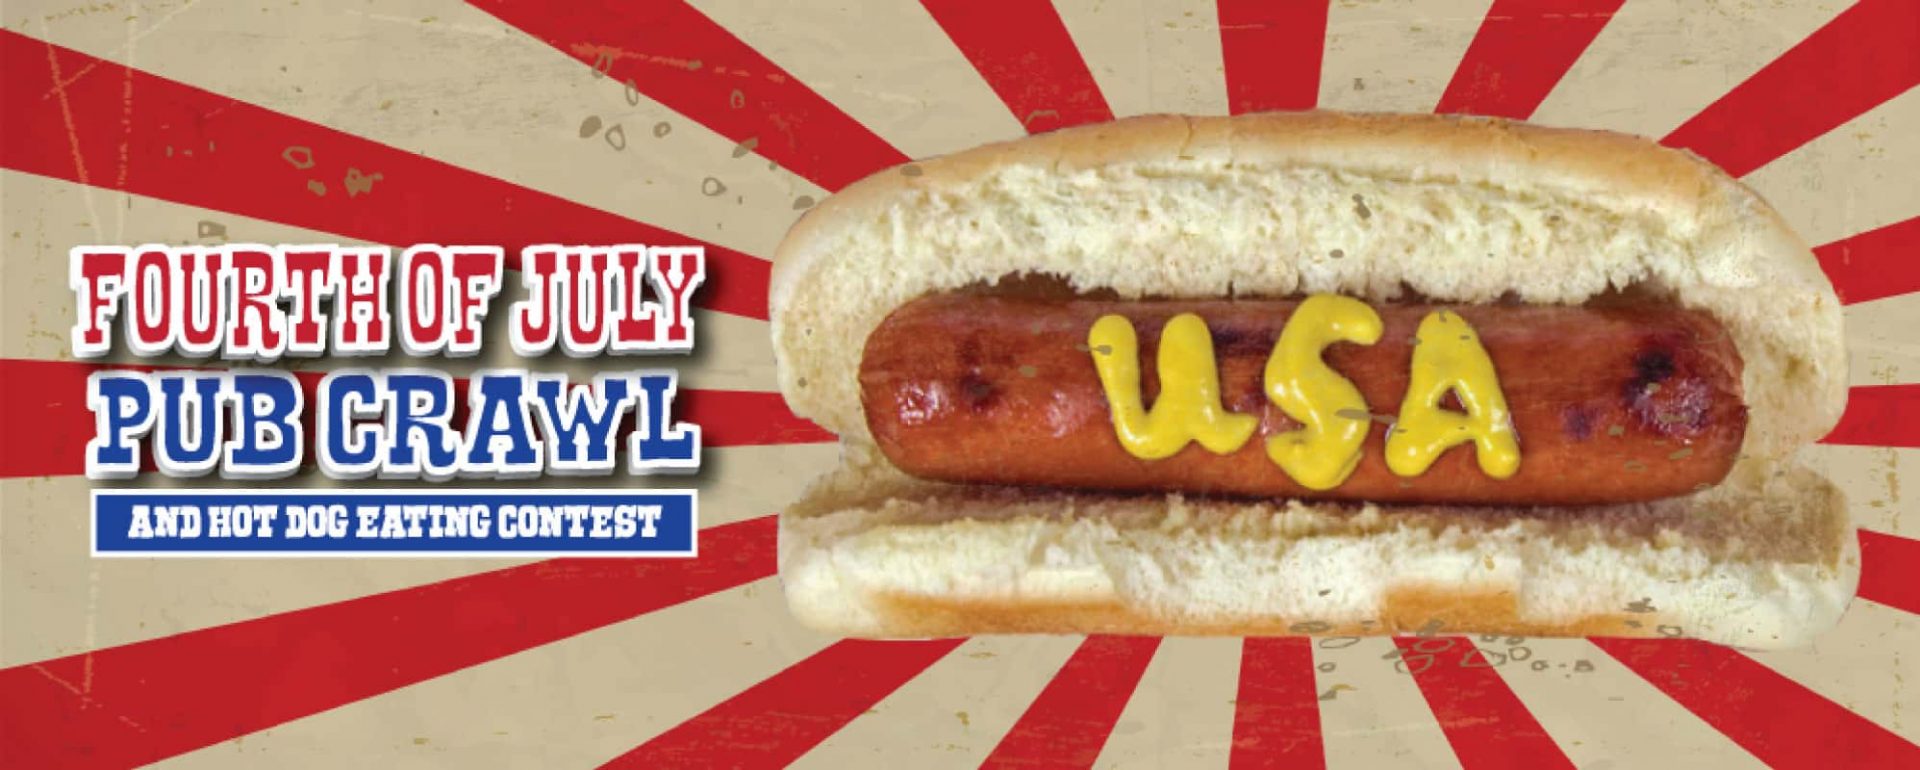 4th of July Pub Crawl and Hot Dog Eating Contest